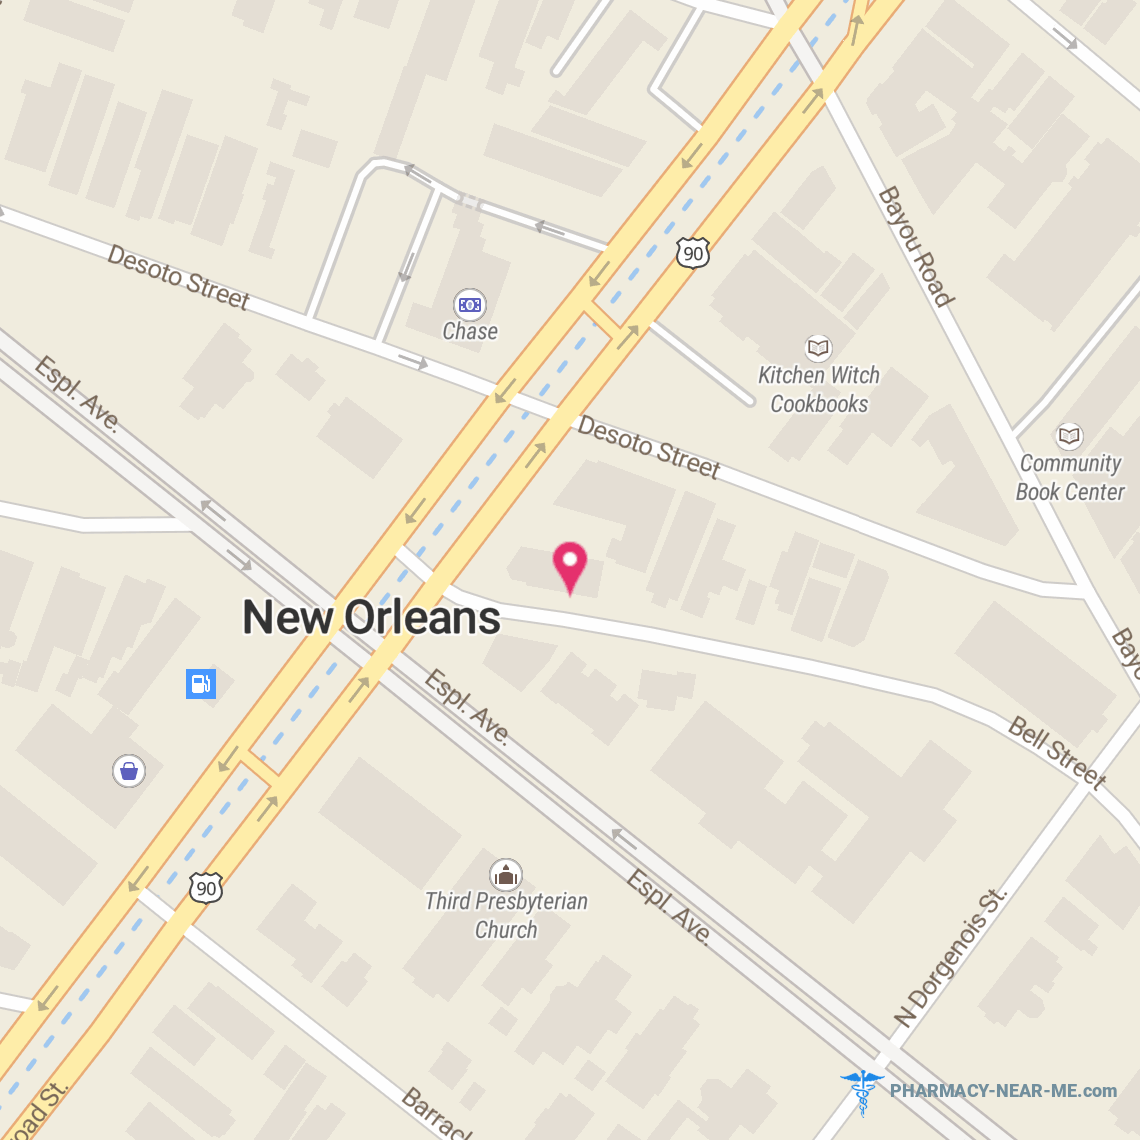 BROAD AVENUE PHARMACY LLC - Pharmacy Hours, Phone, Reviews & Information: 1400 North Broad Street, New Orleans, Louisiana 70119, United States